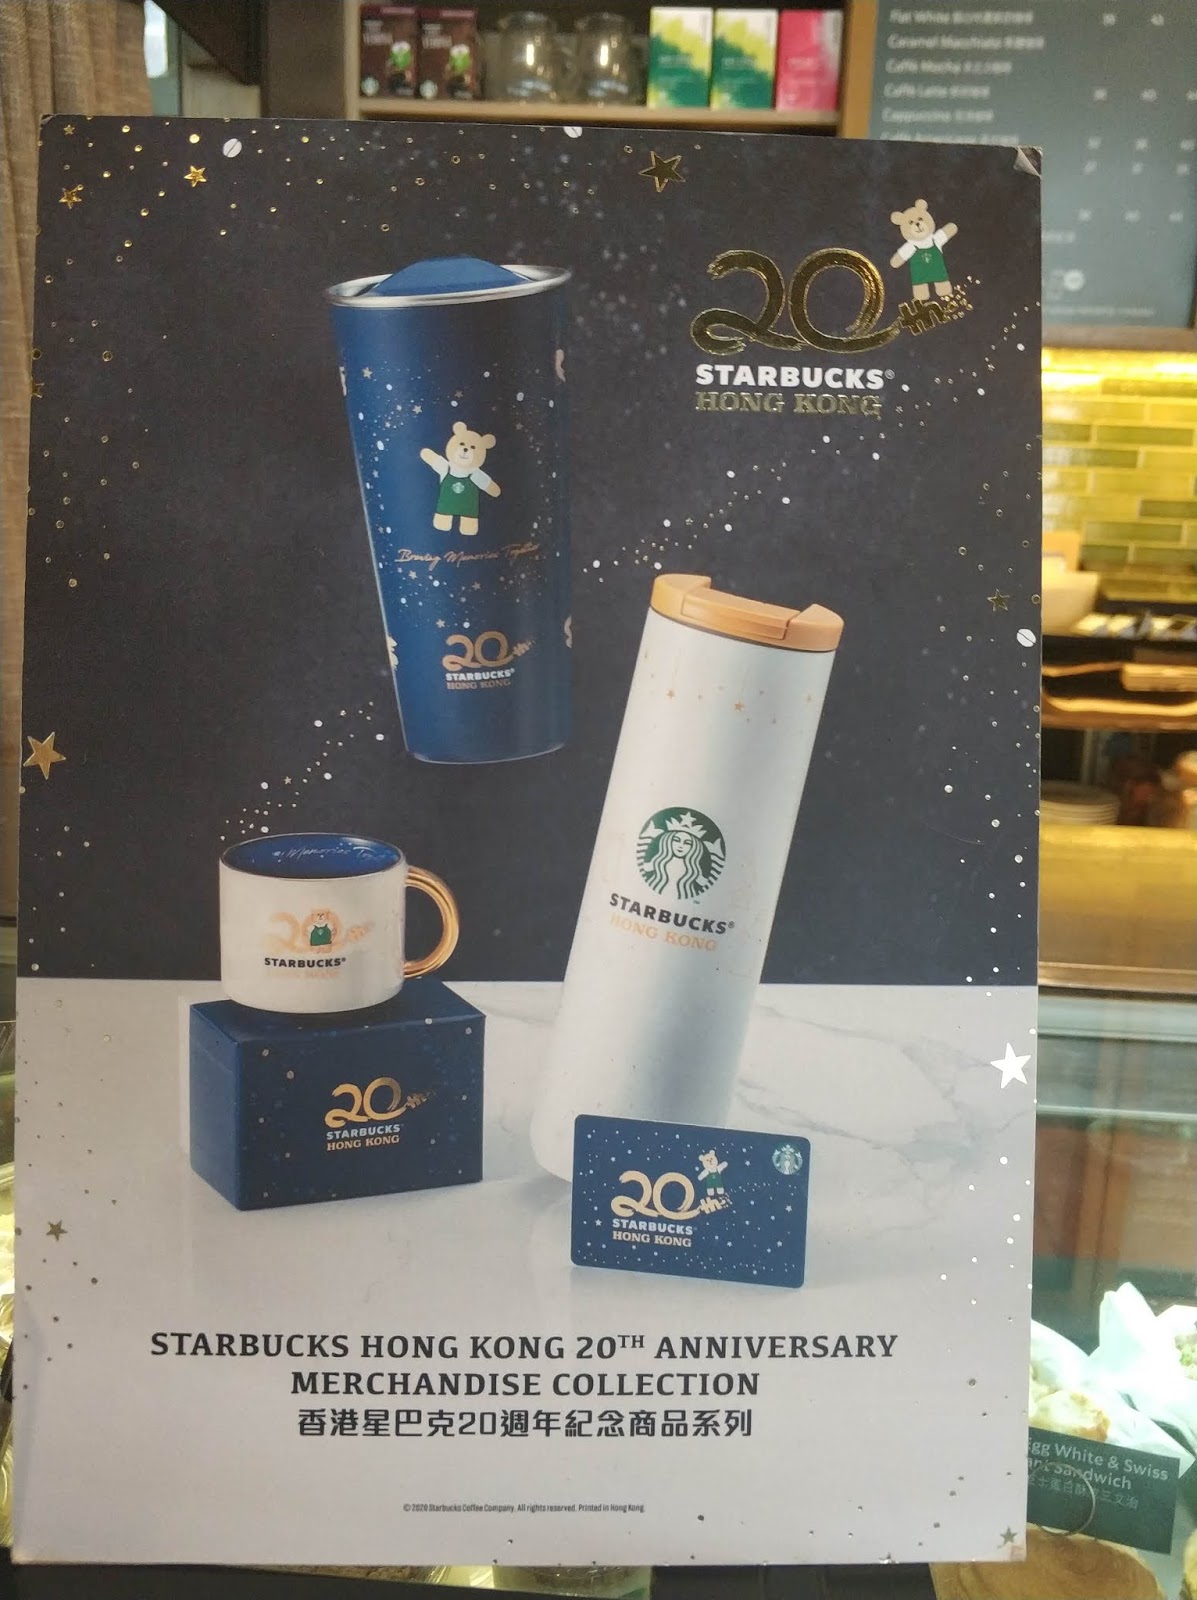 2015 HAPPY HOLIDAYS CORP EXCLUSIVE CARD Starbucks WITH SLEEVE ~ LTD ED 6118